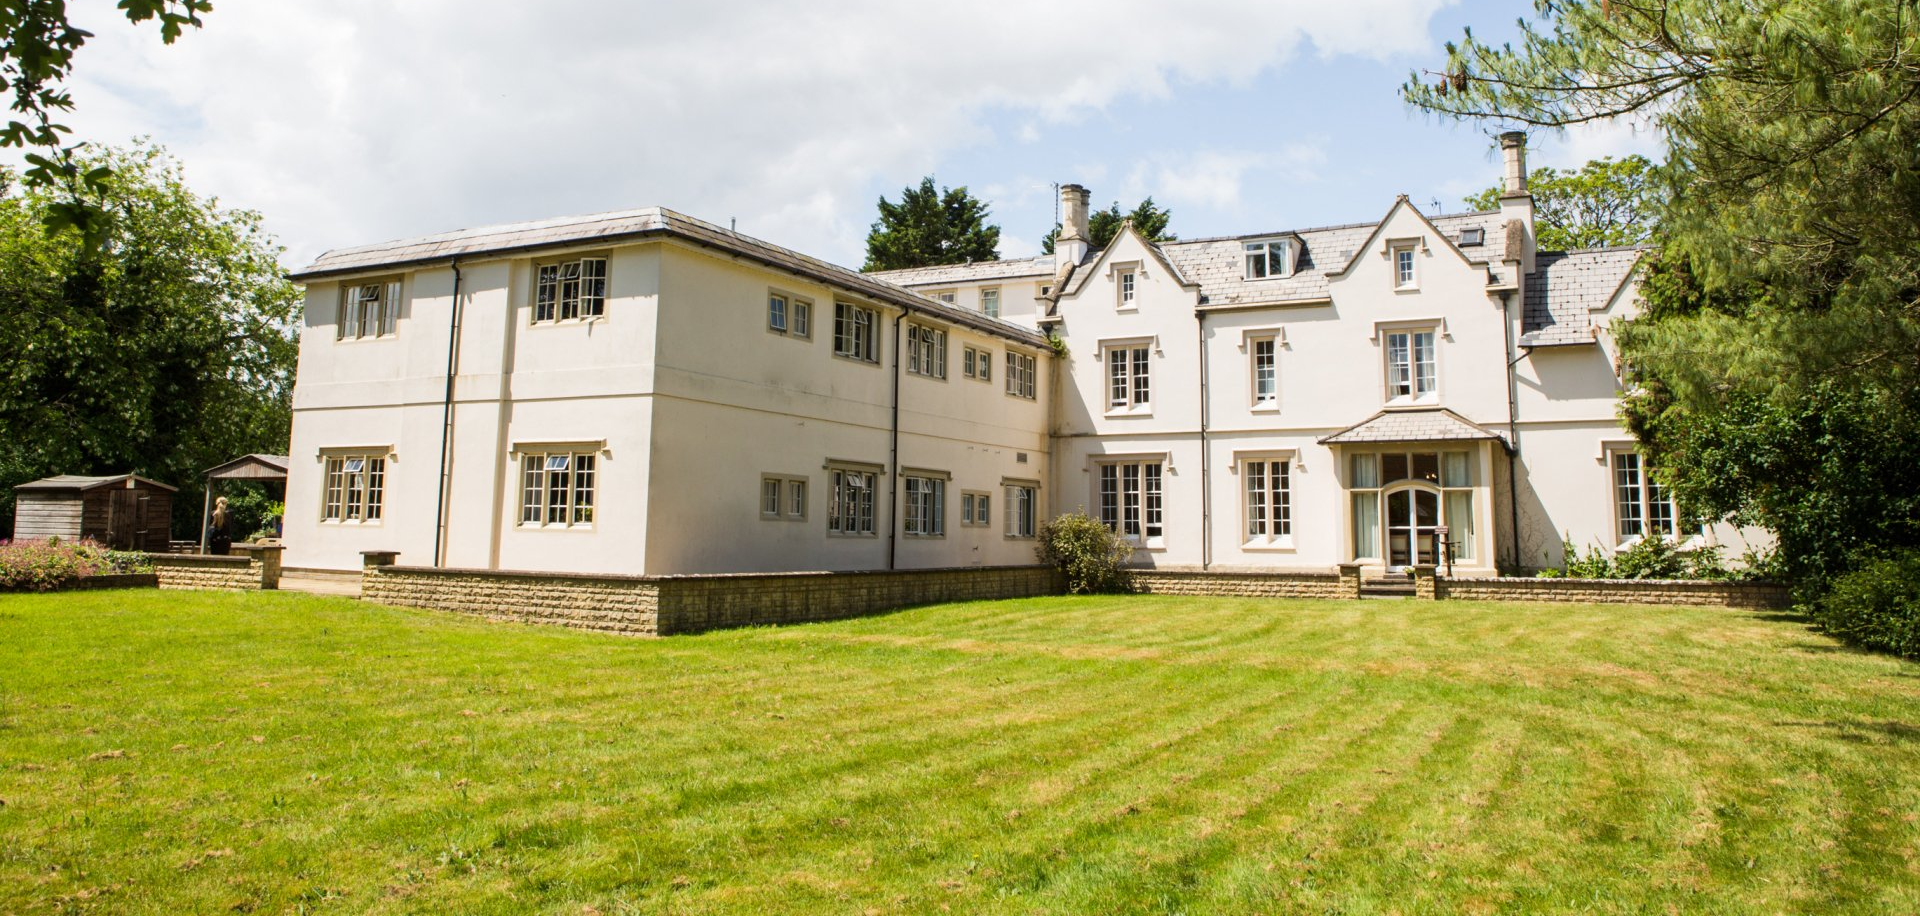 Genie Care Homes | The Old Vicarage, Frampton on Severn